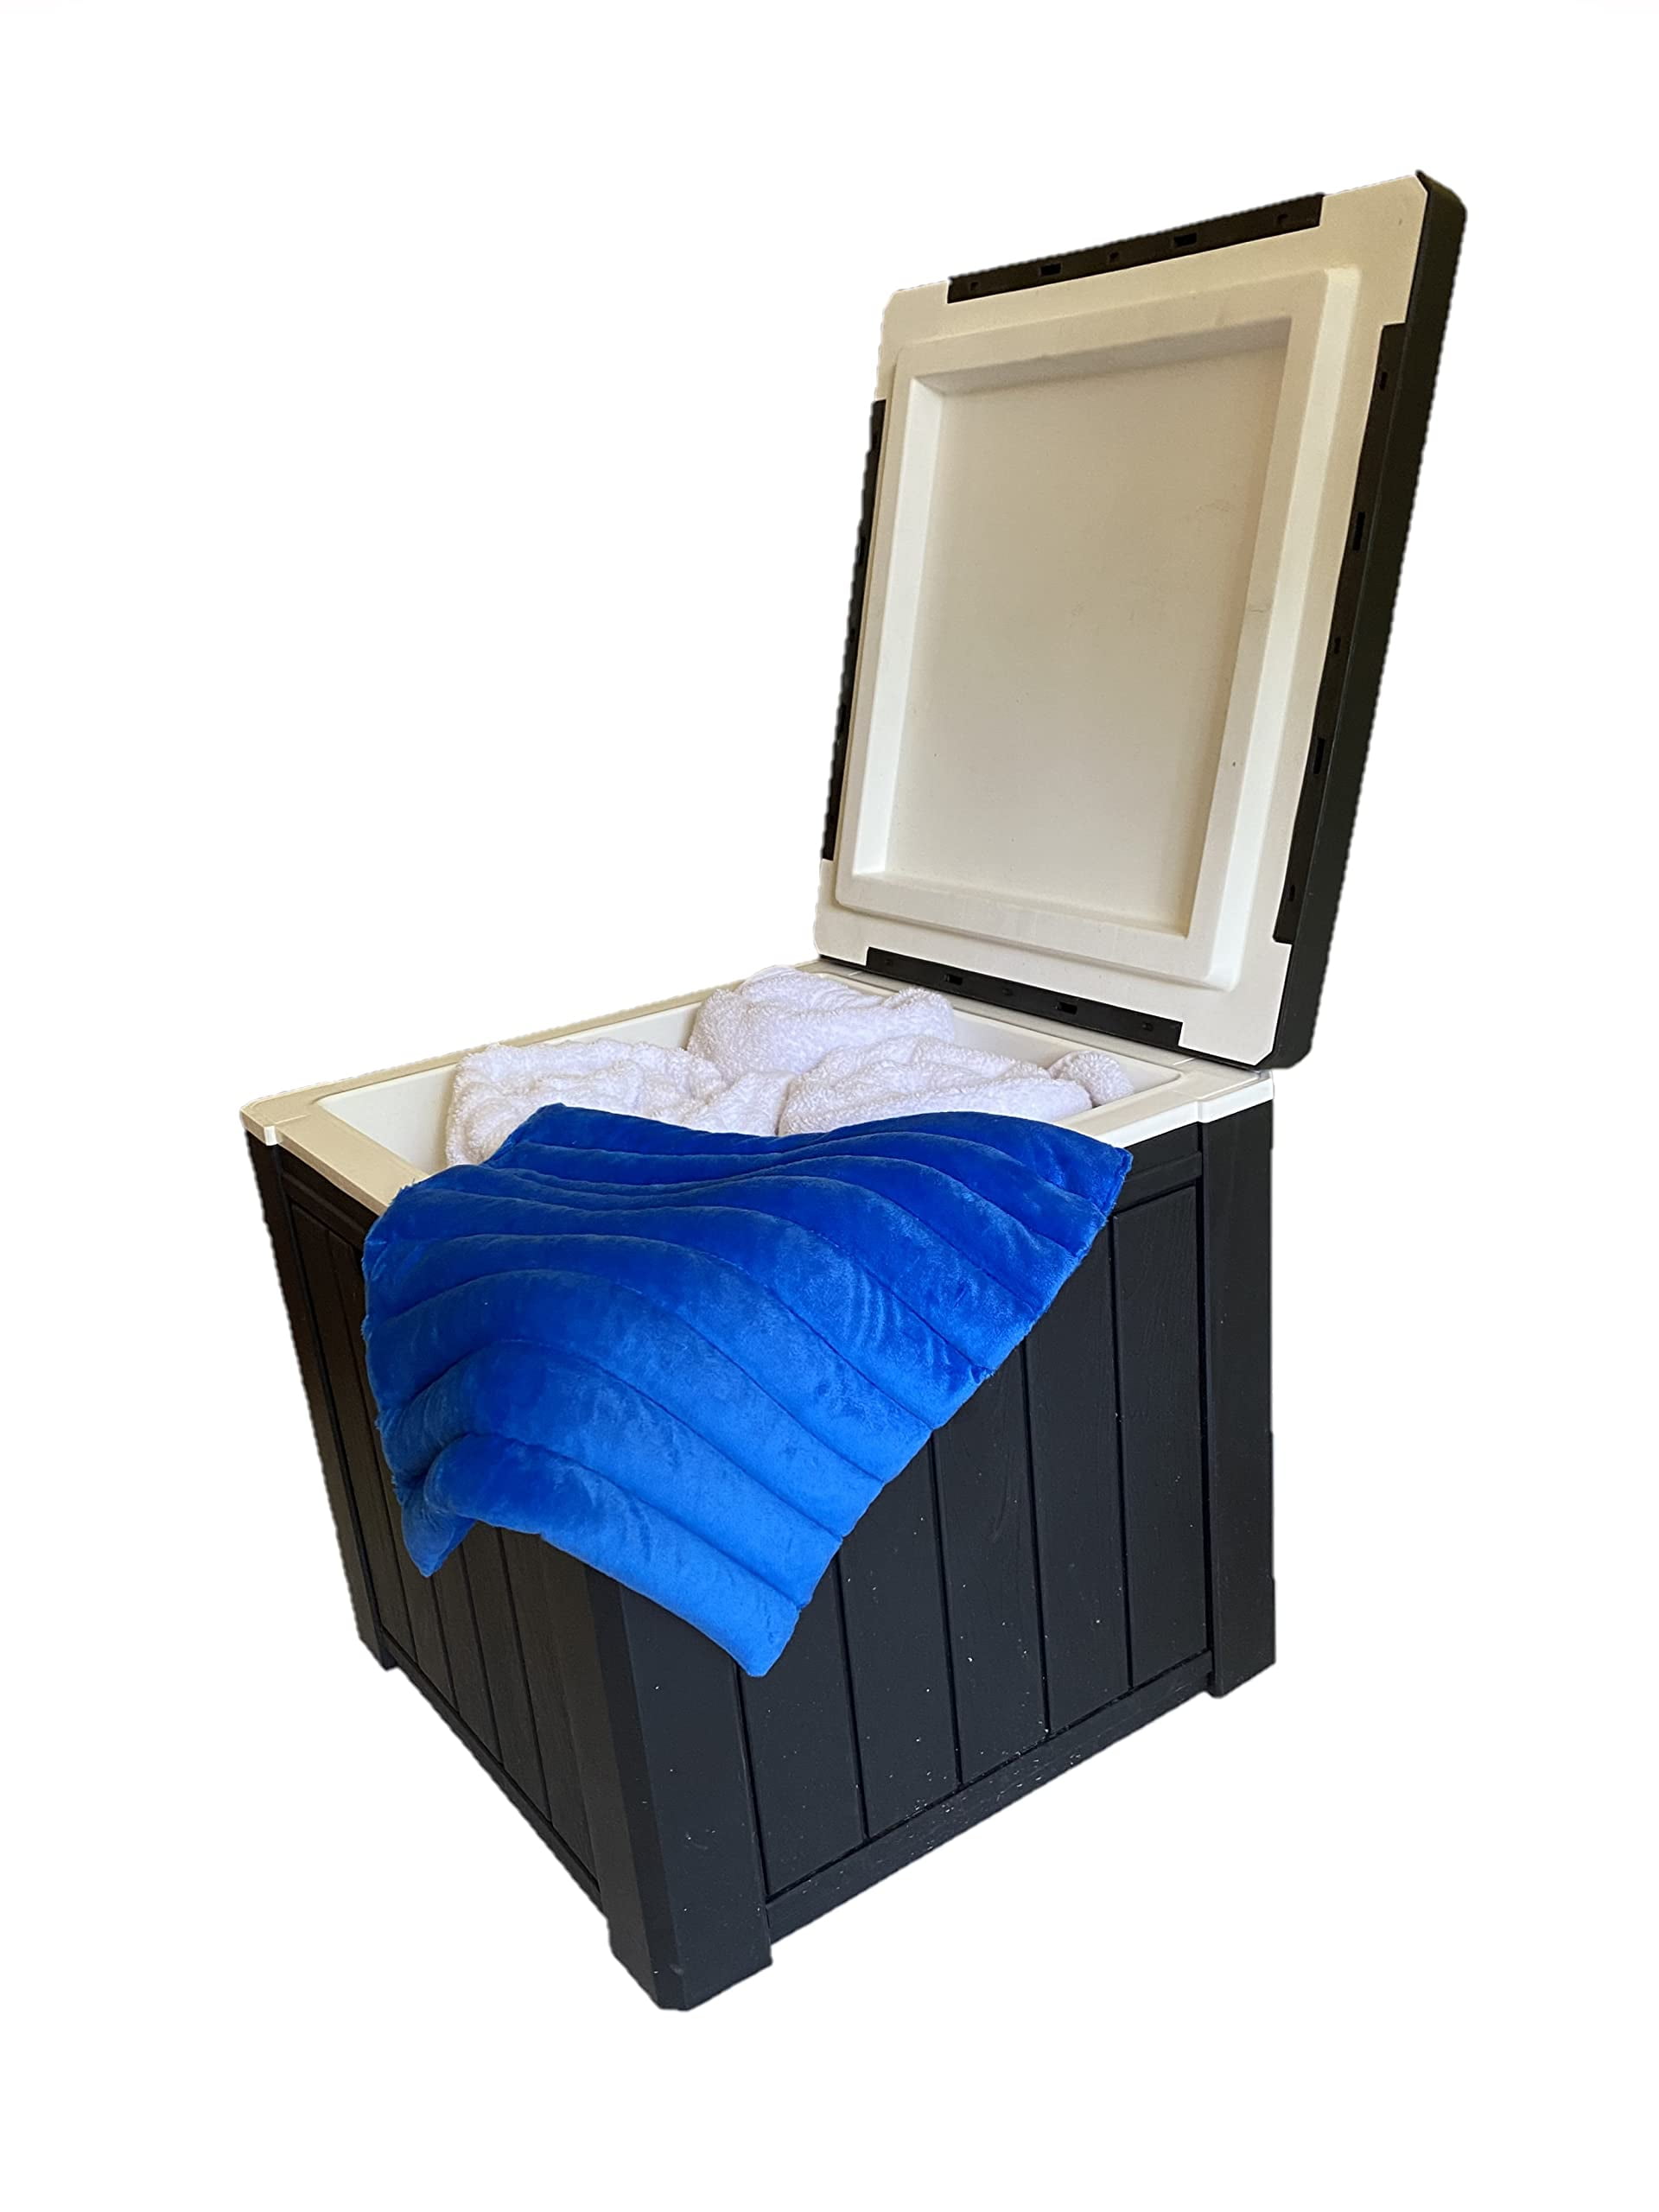 Hot Tub Towel and Robe Warmer/Deck Box with Microwavable Heat Pad